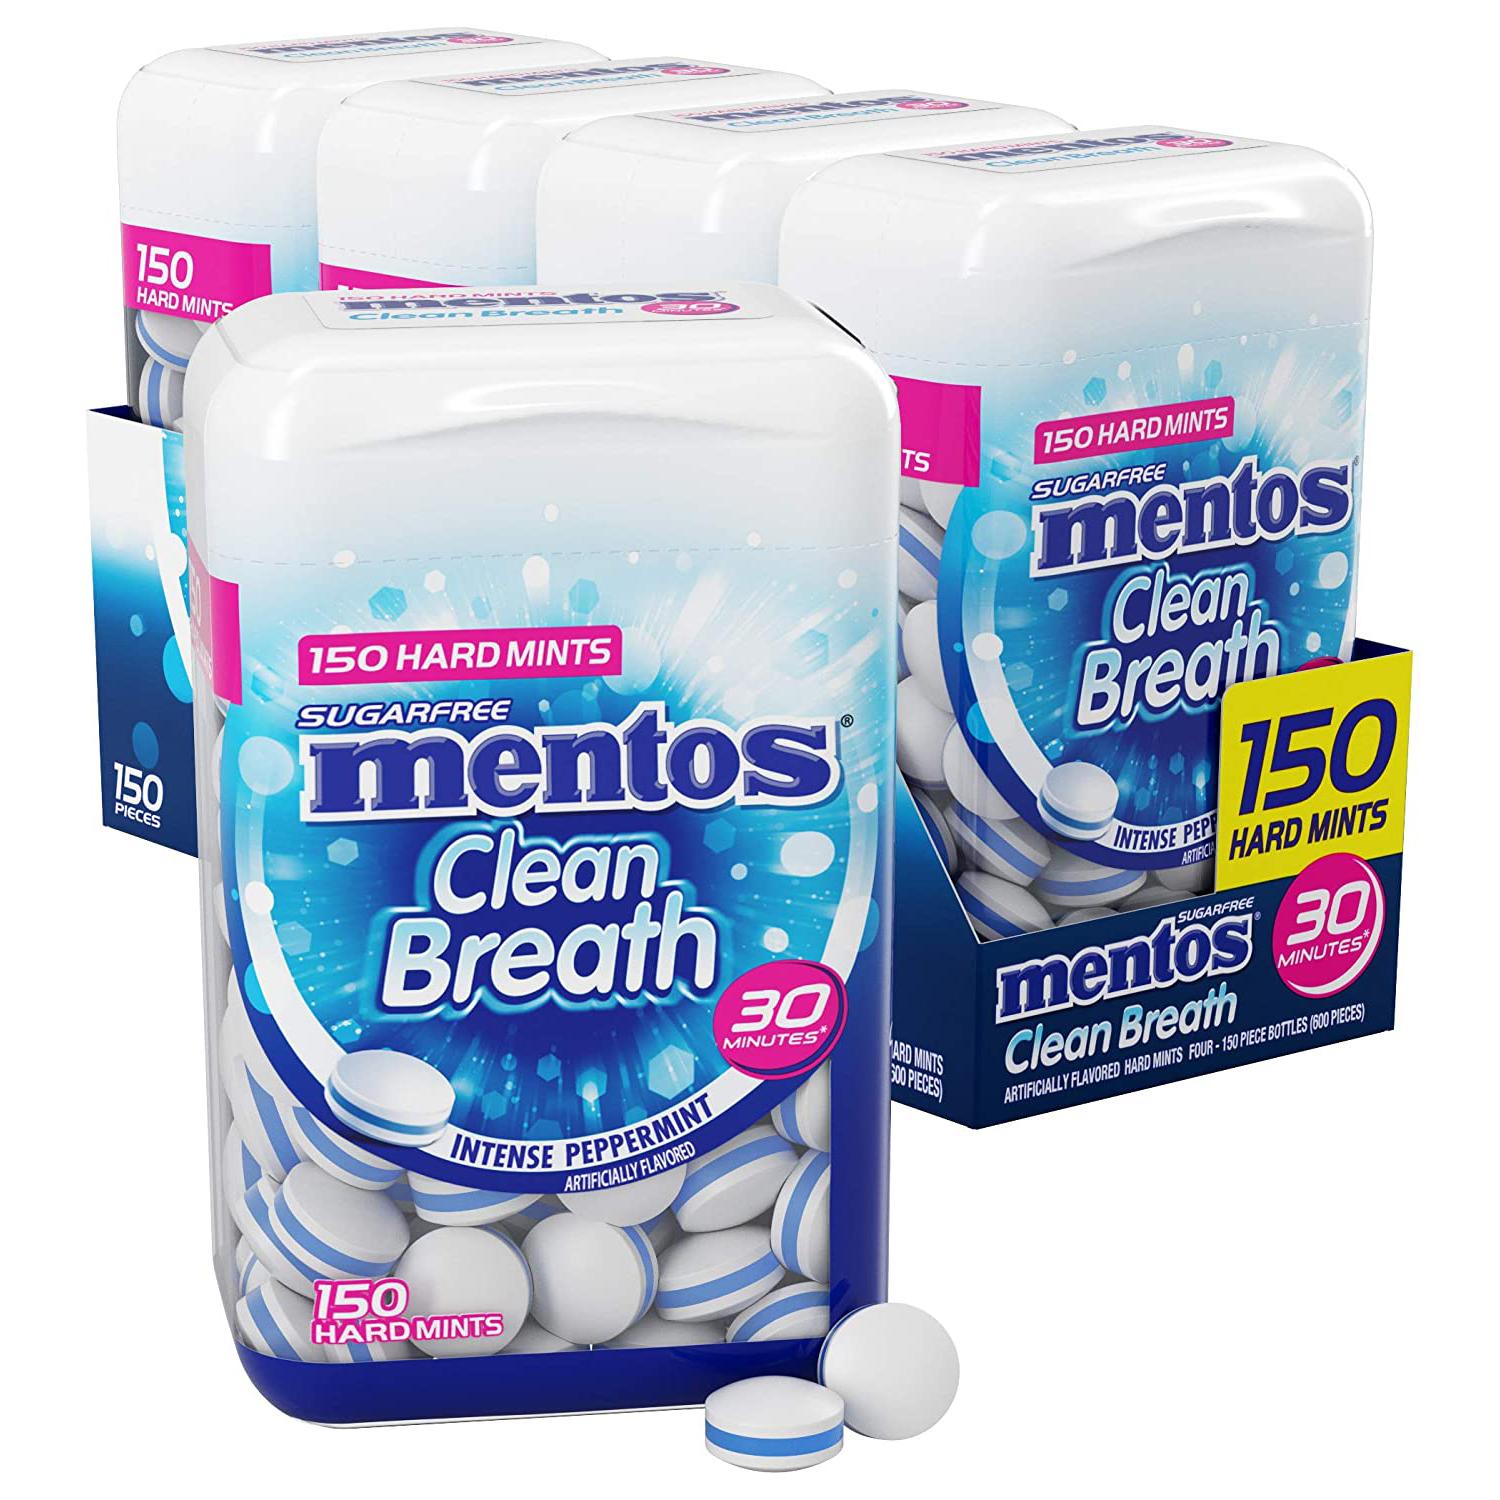 Mentos Clean Breath Hard Mints Intense Peppermint 4 Pack for $9.74 Shipped